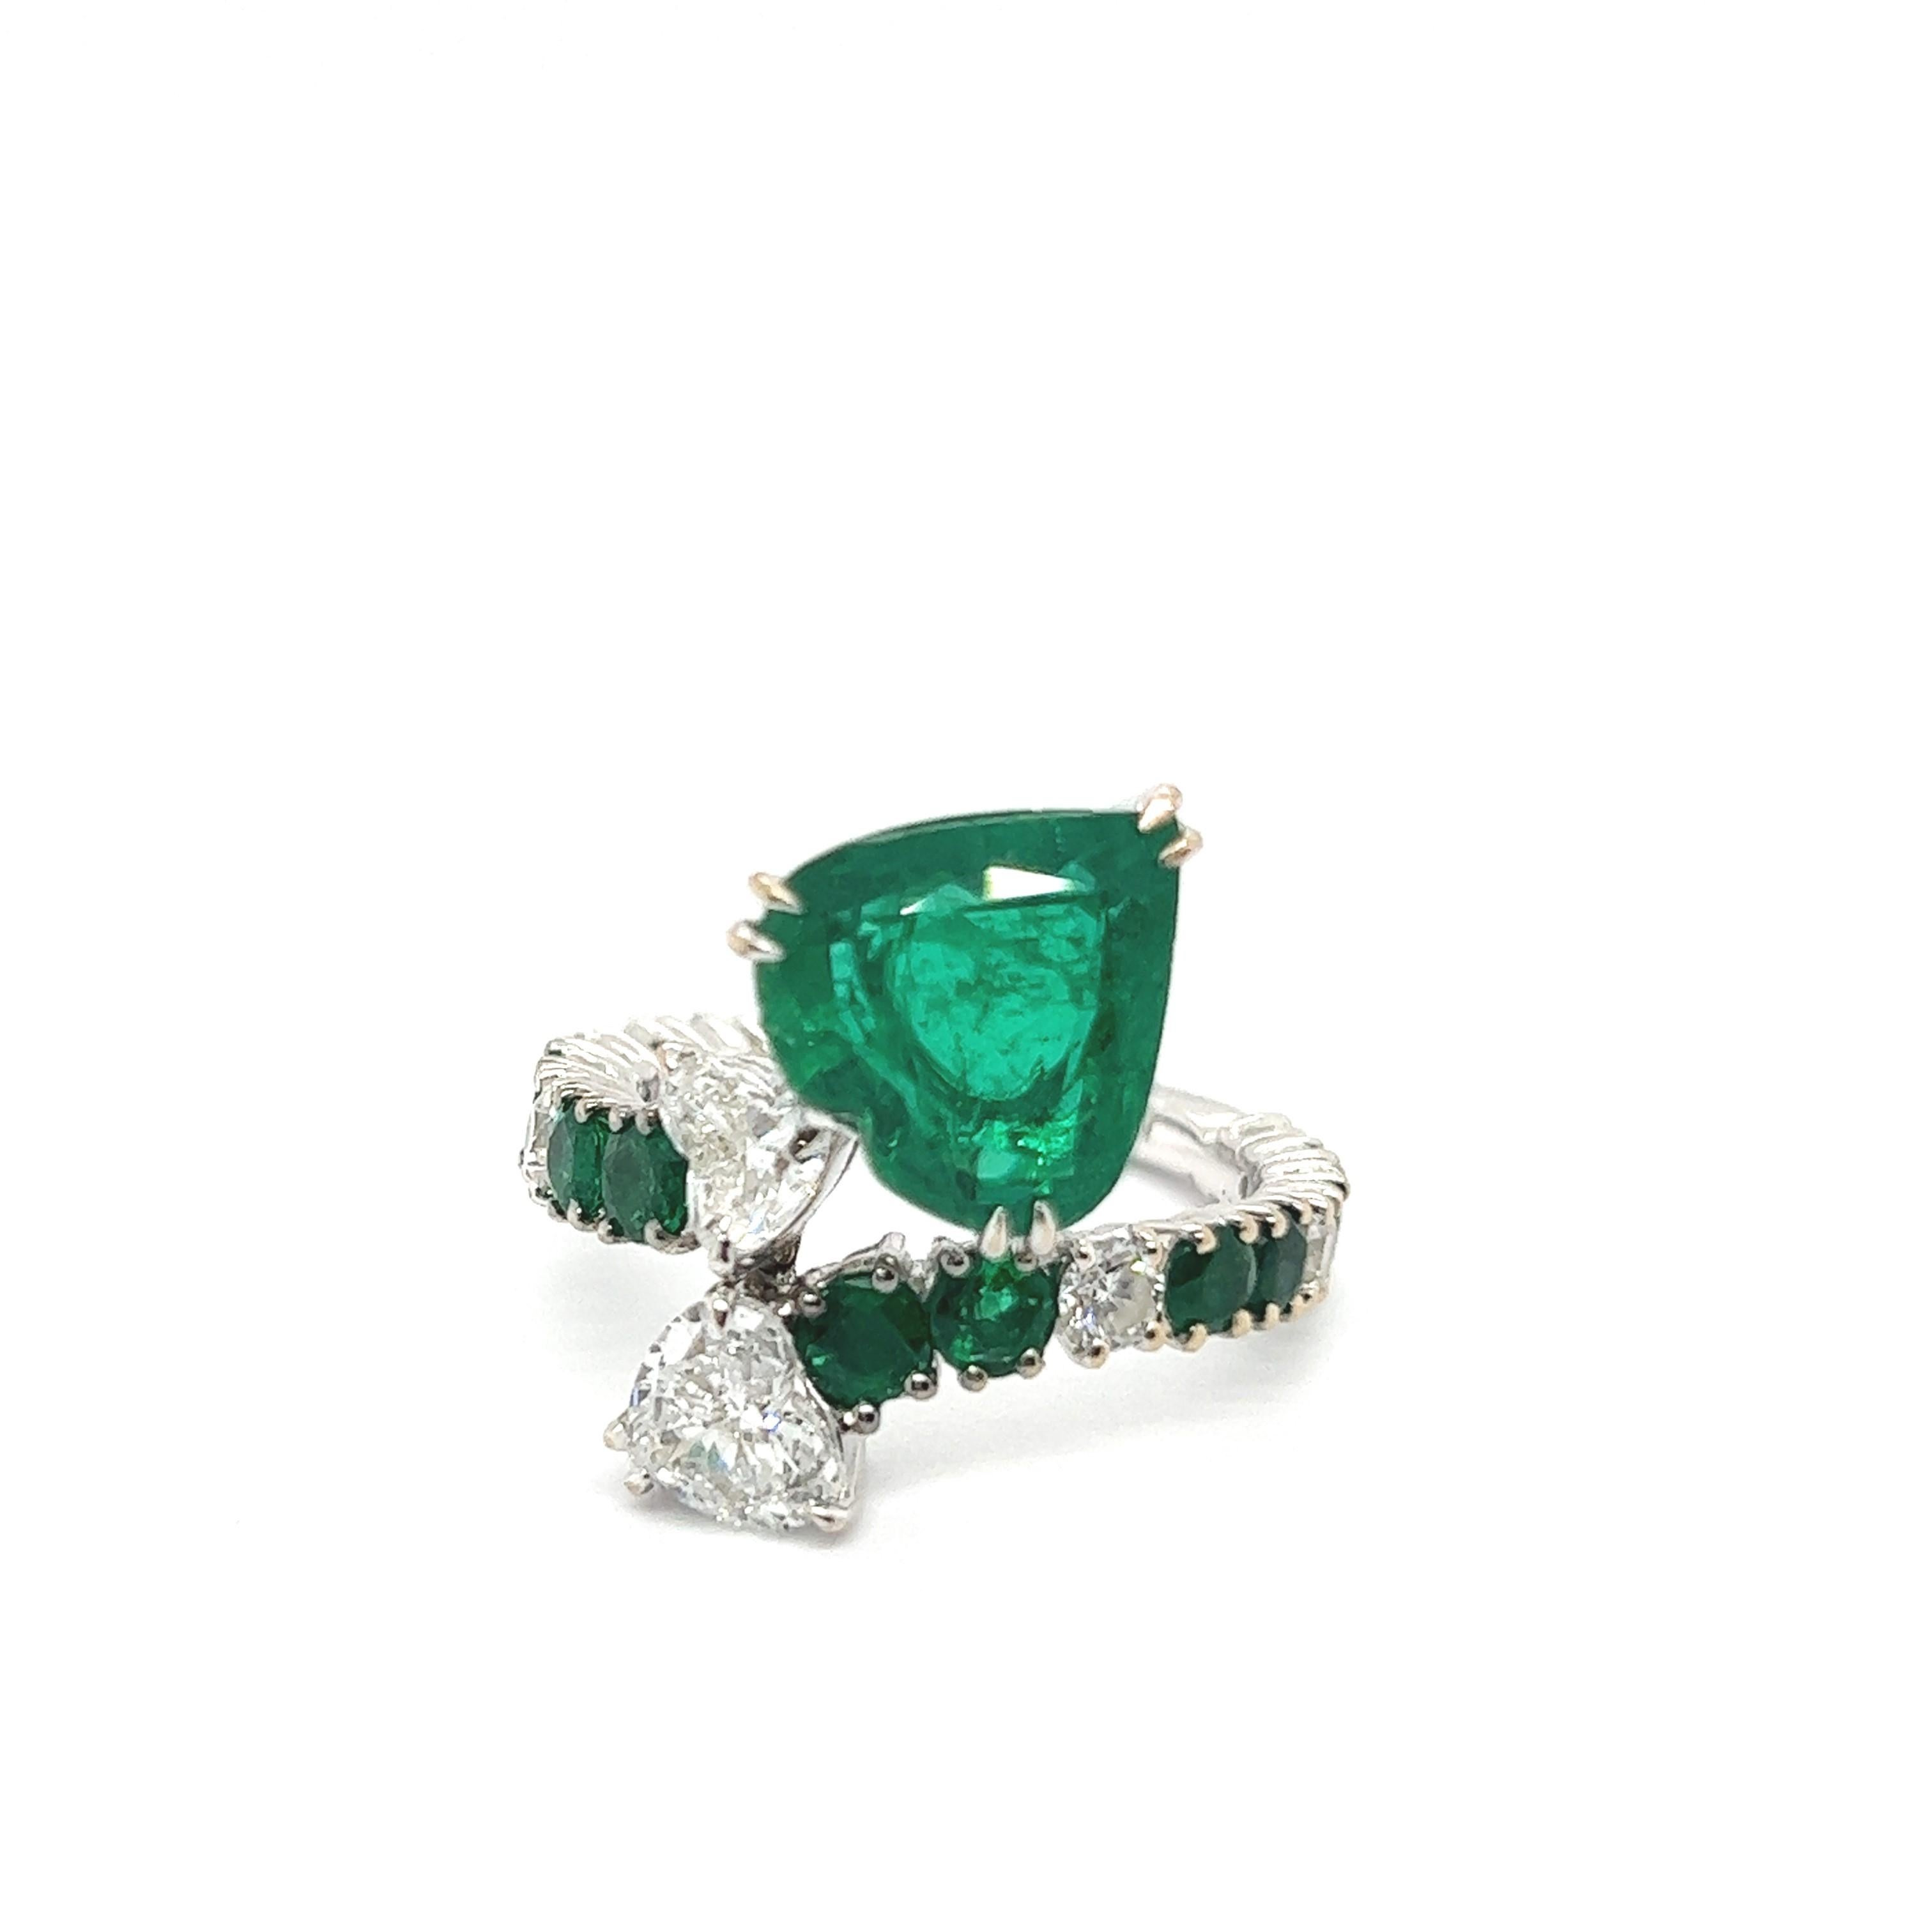 Gübelin Certified 4.20 Carat Emerald Ring with Diamonds in 18 Karat White Gold For Sale 3